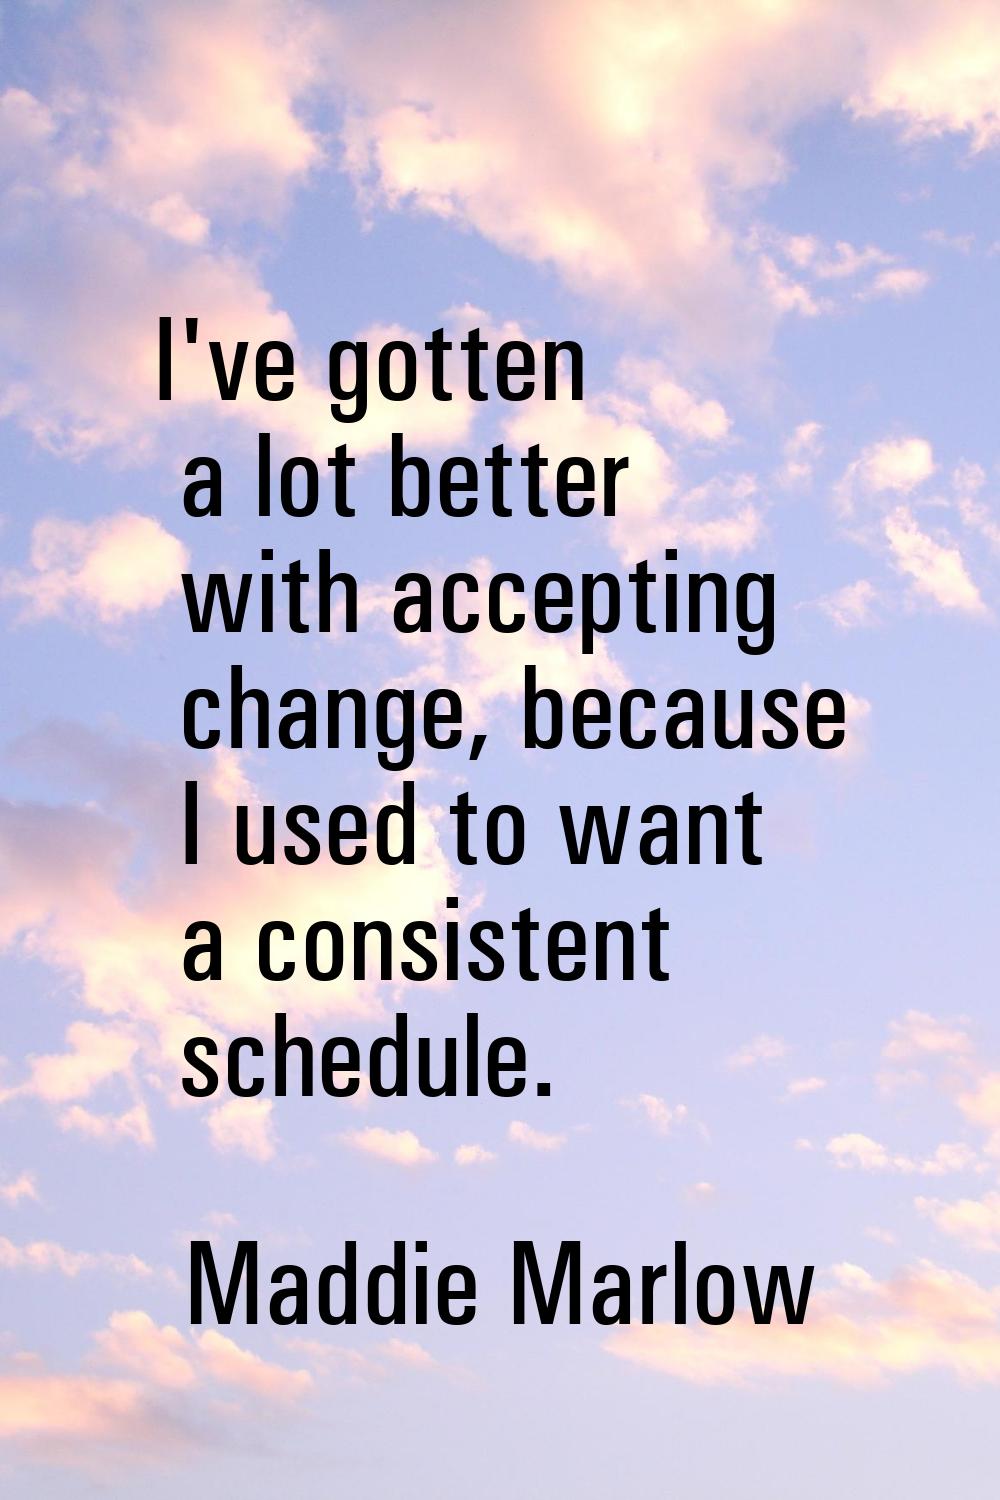 I've gotten a lot better with accepting change, because I used to want a consistent schedule.